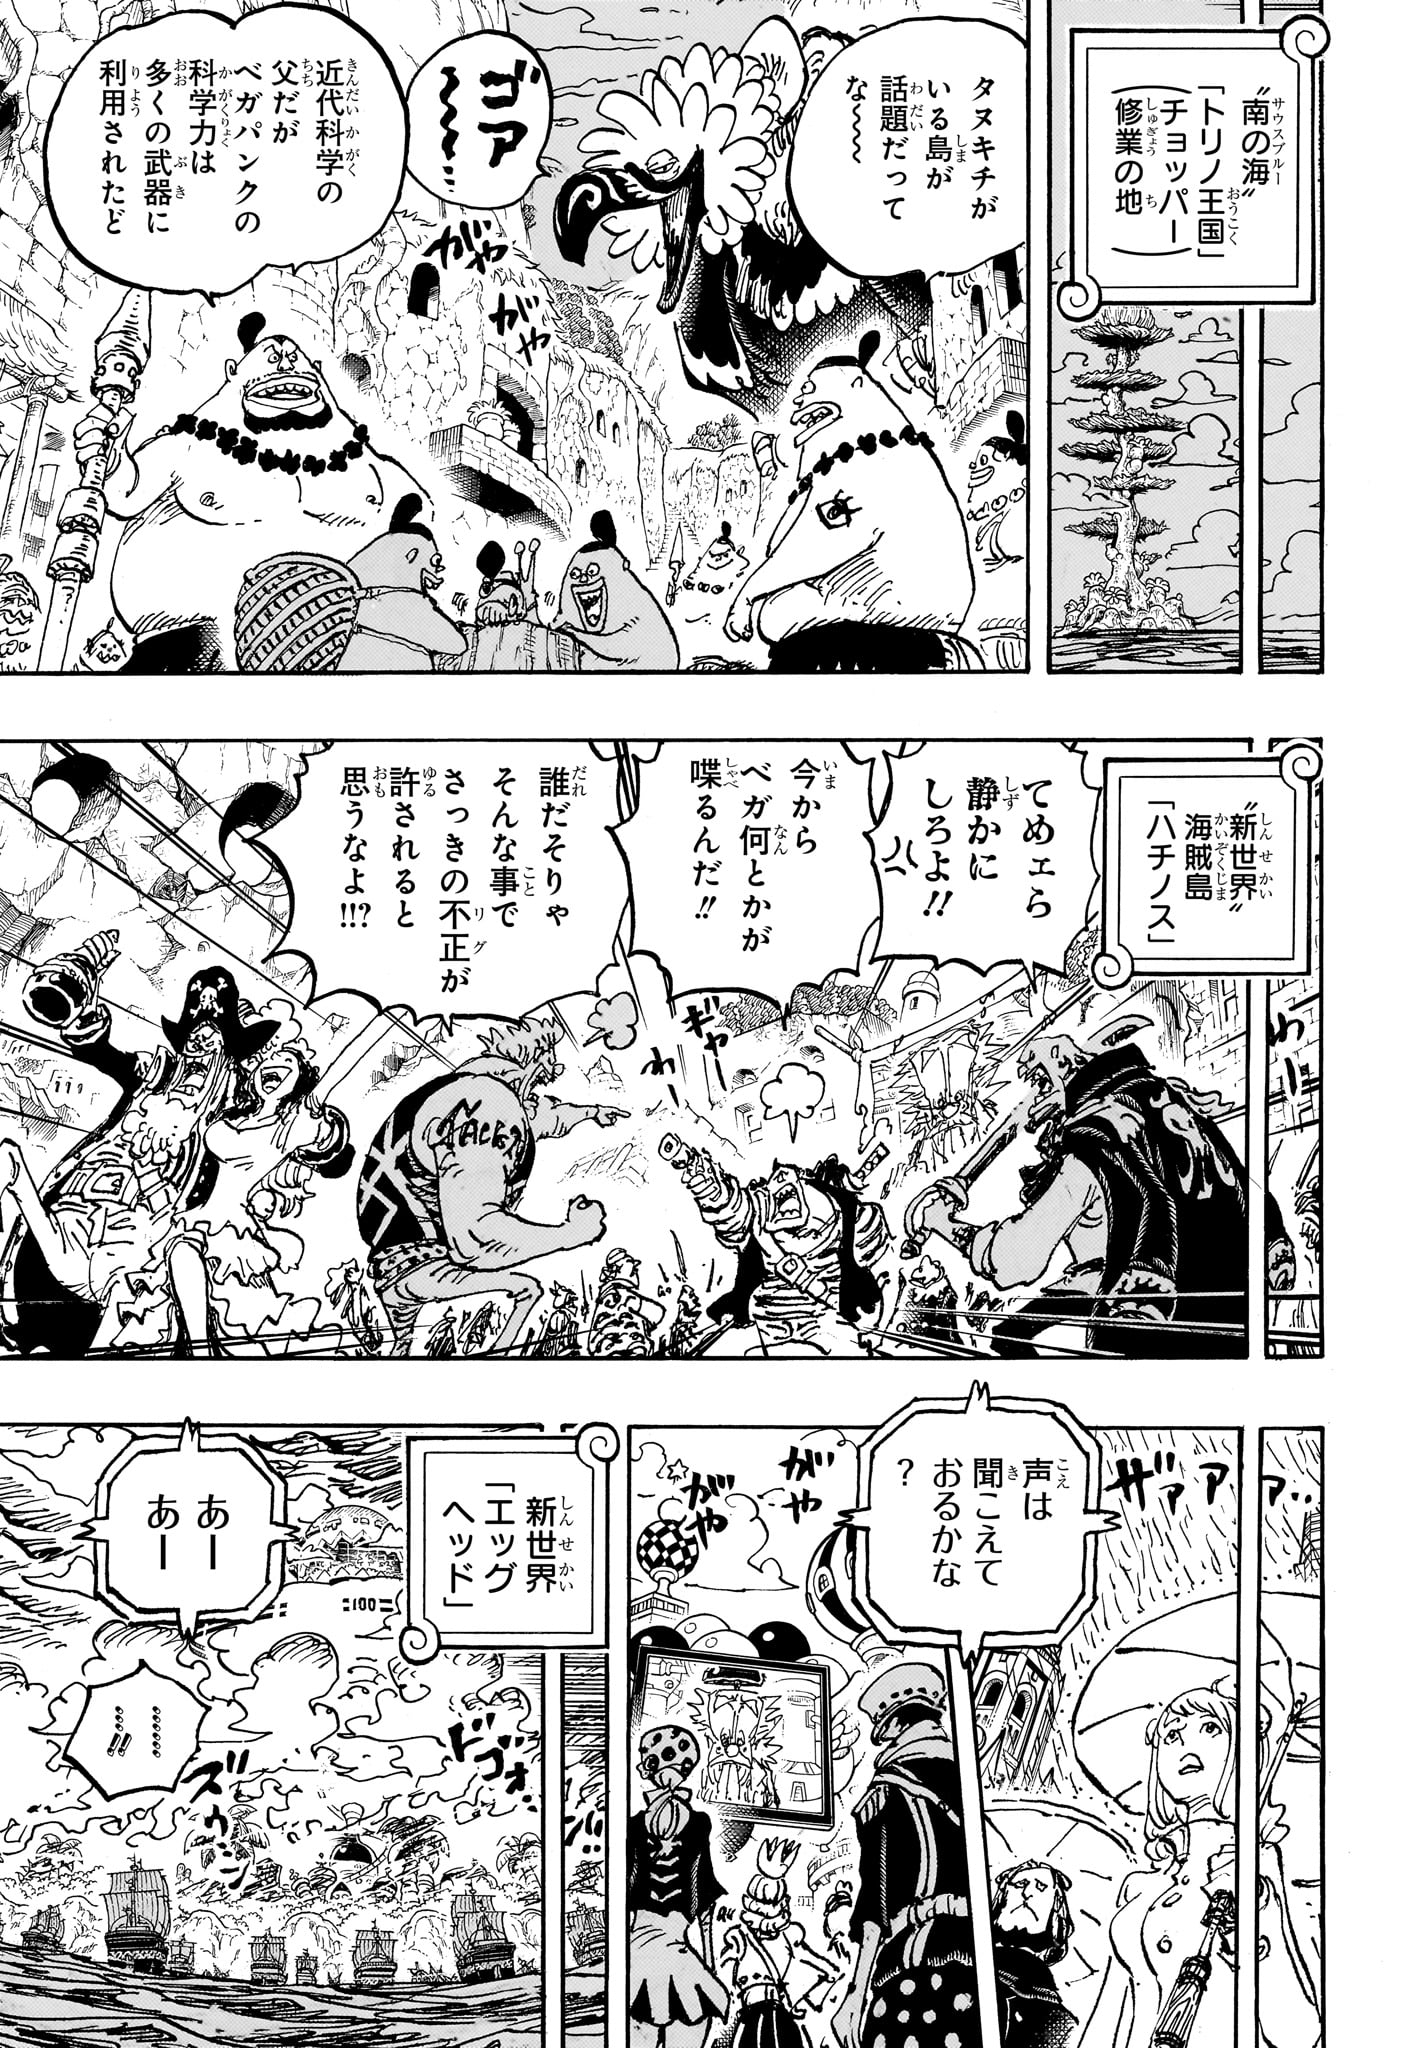 One Piece - Chapter 1113 - Page 7